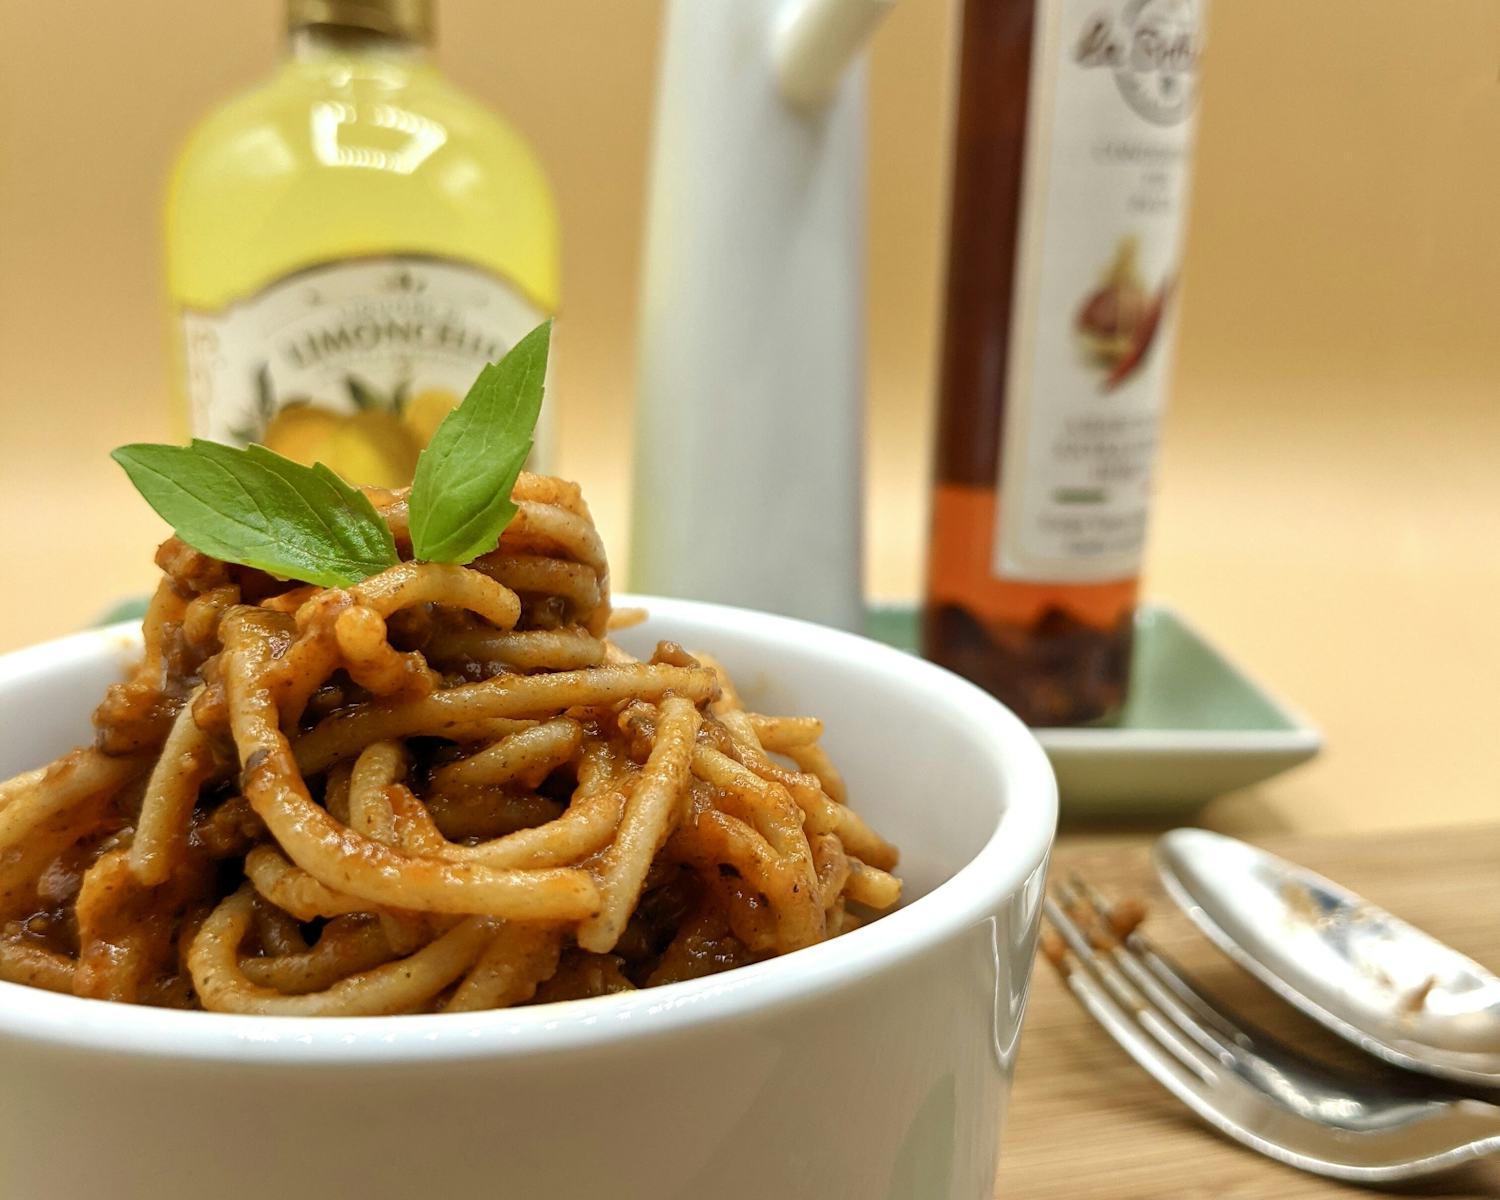 Spaghetti Bolognese with the sauce from Imago Insects